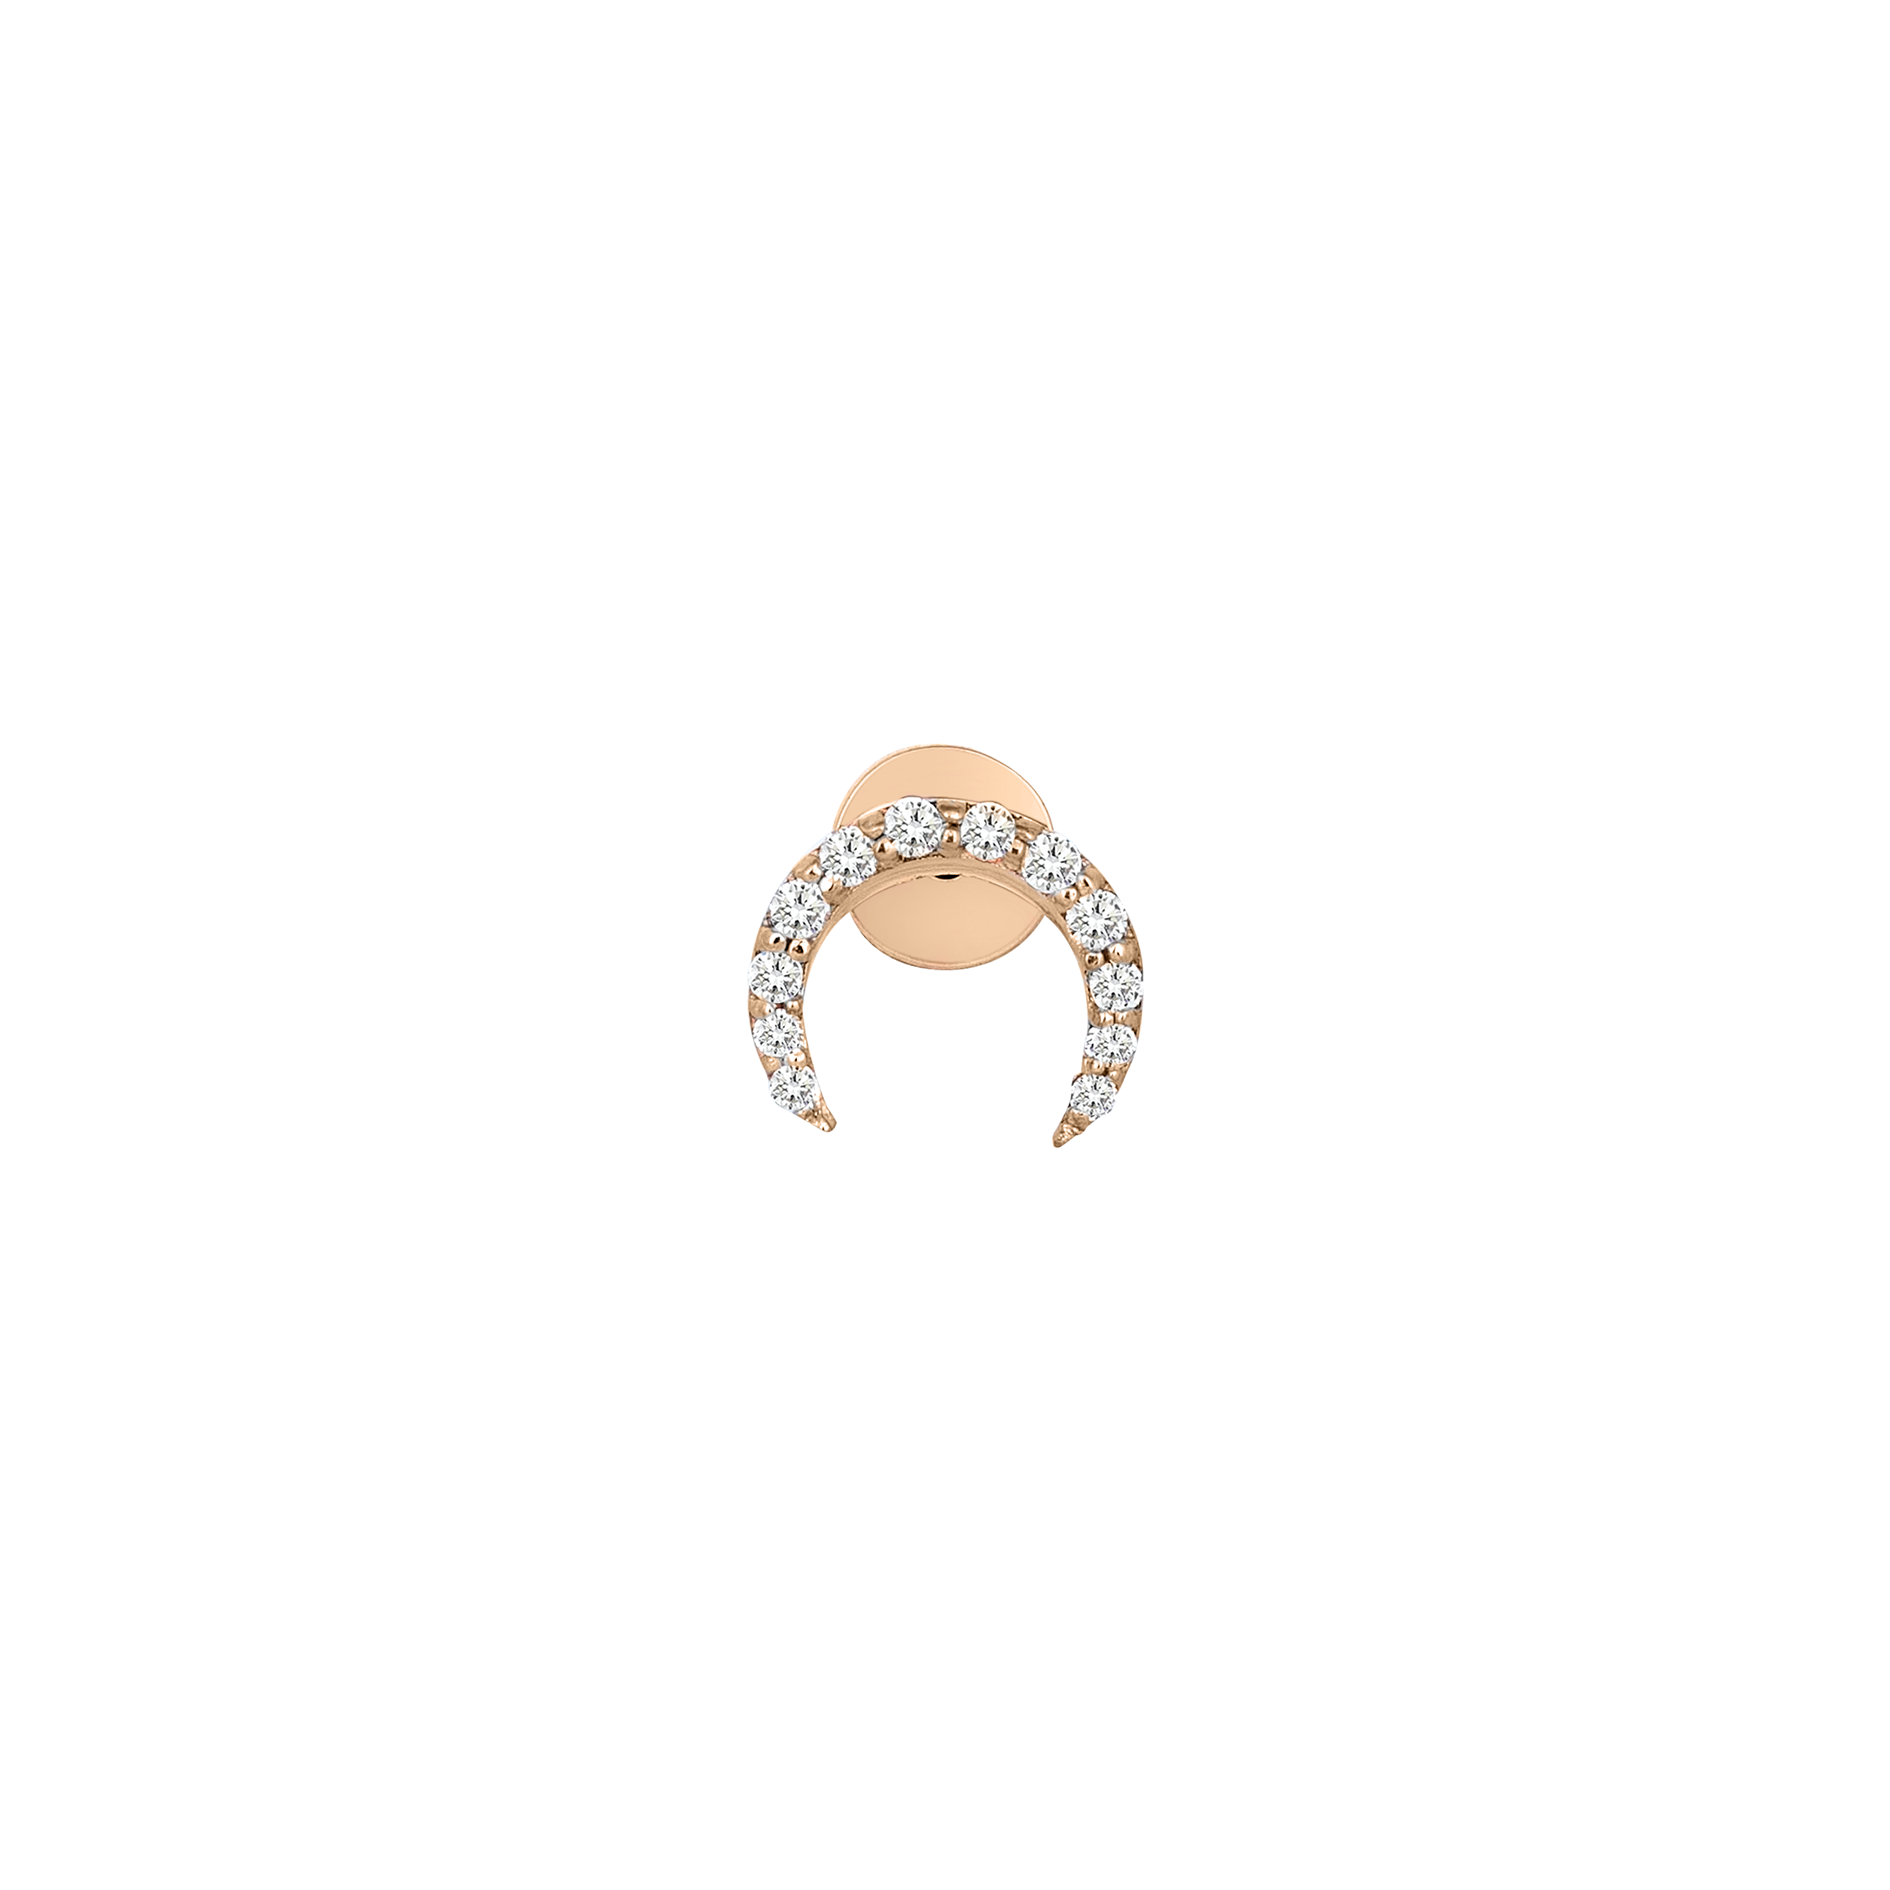 Selena Stud in Rose Gold - Her Story Shop